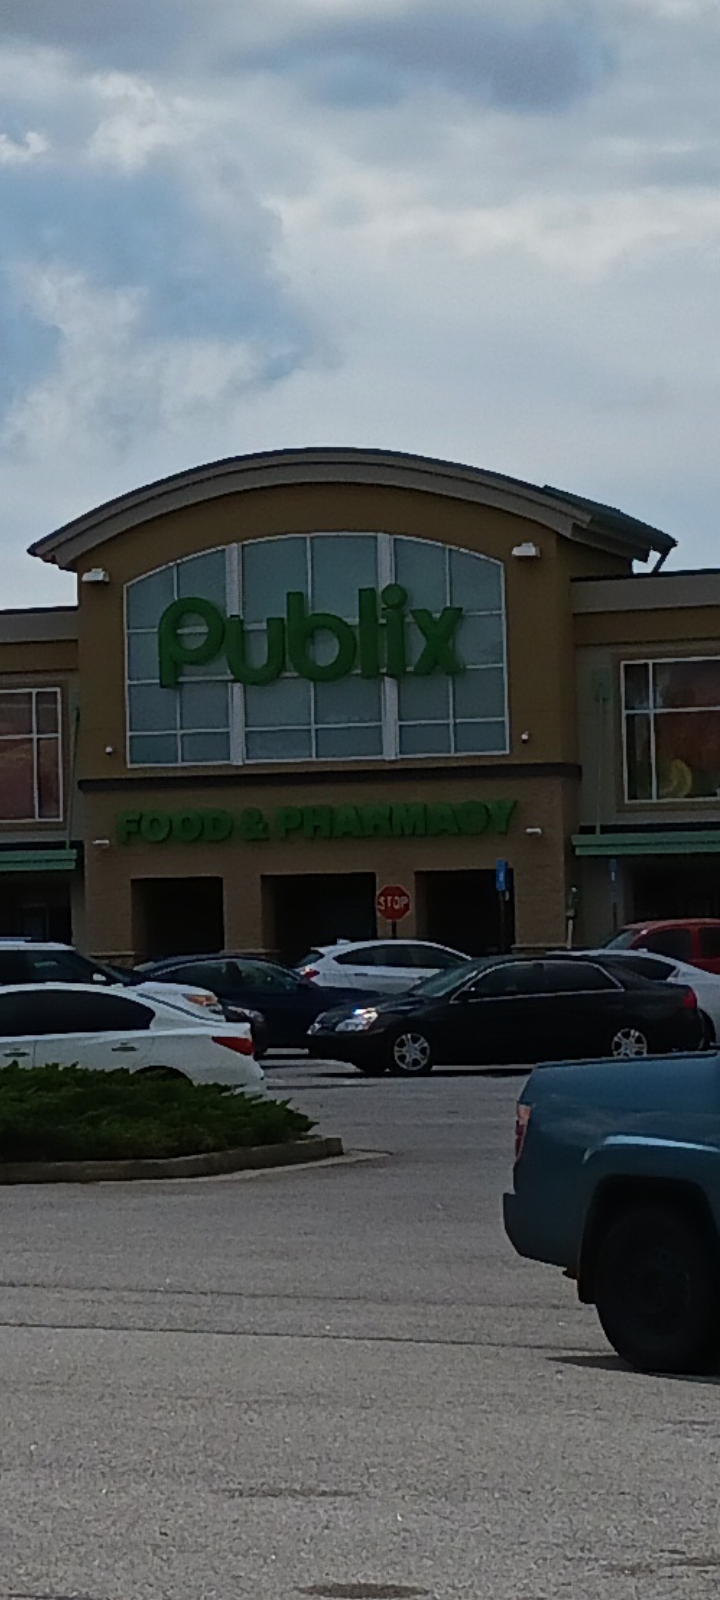 Publix Pharmacy at The Shoppes at Locust Grove